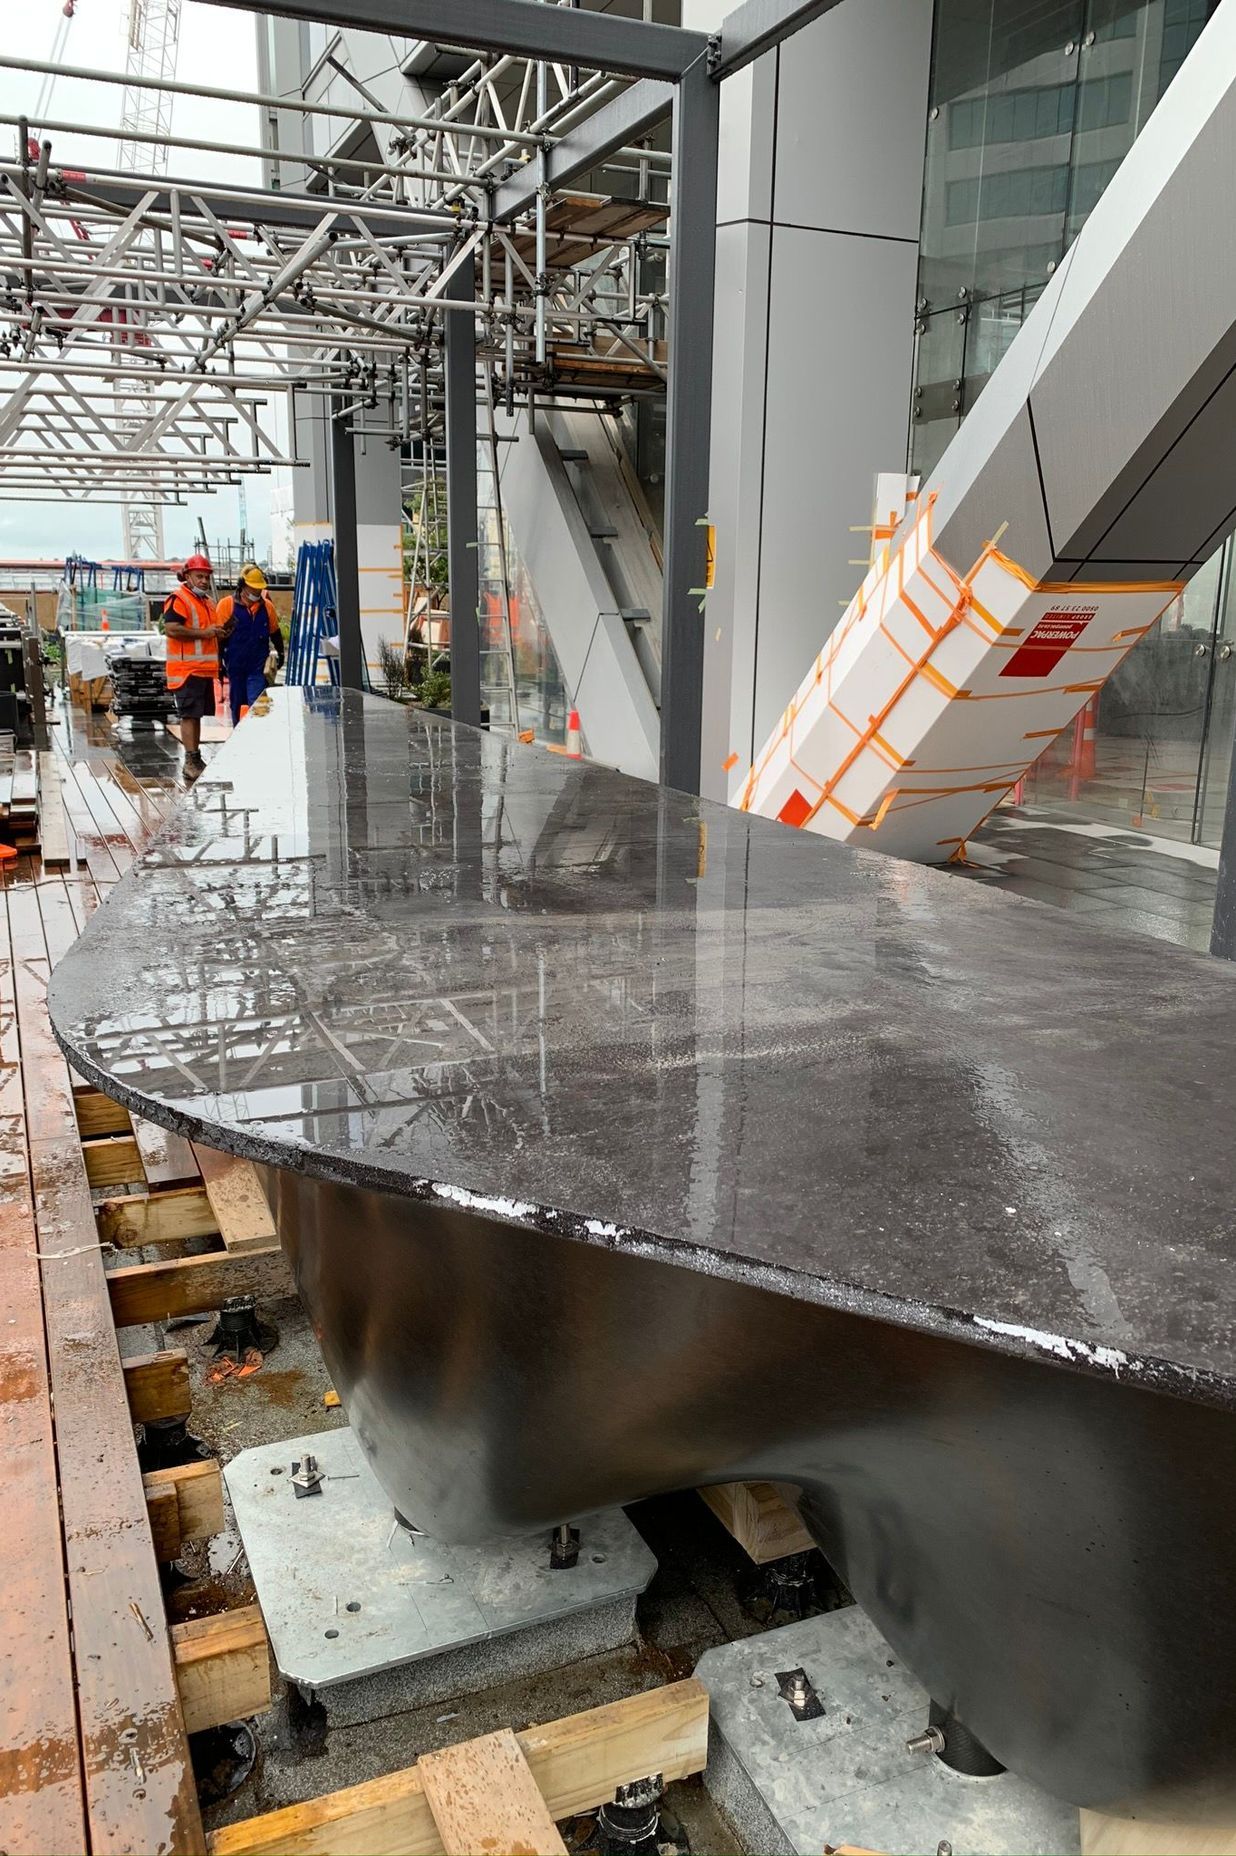 Commercial Bay - Concrete table by Jagas paving and precast